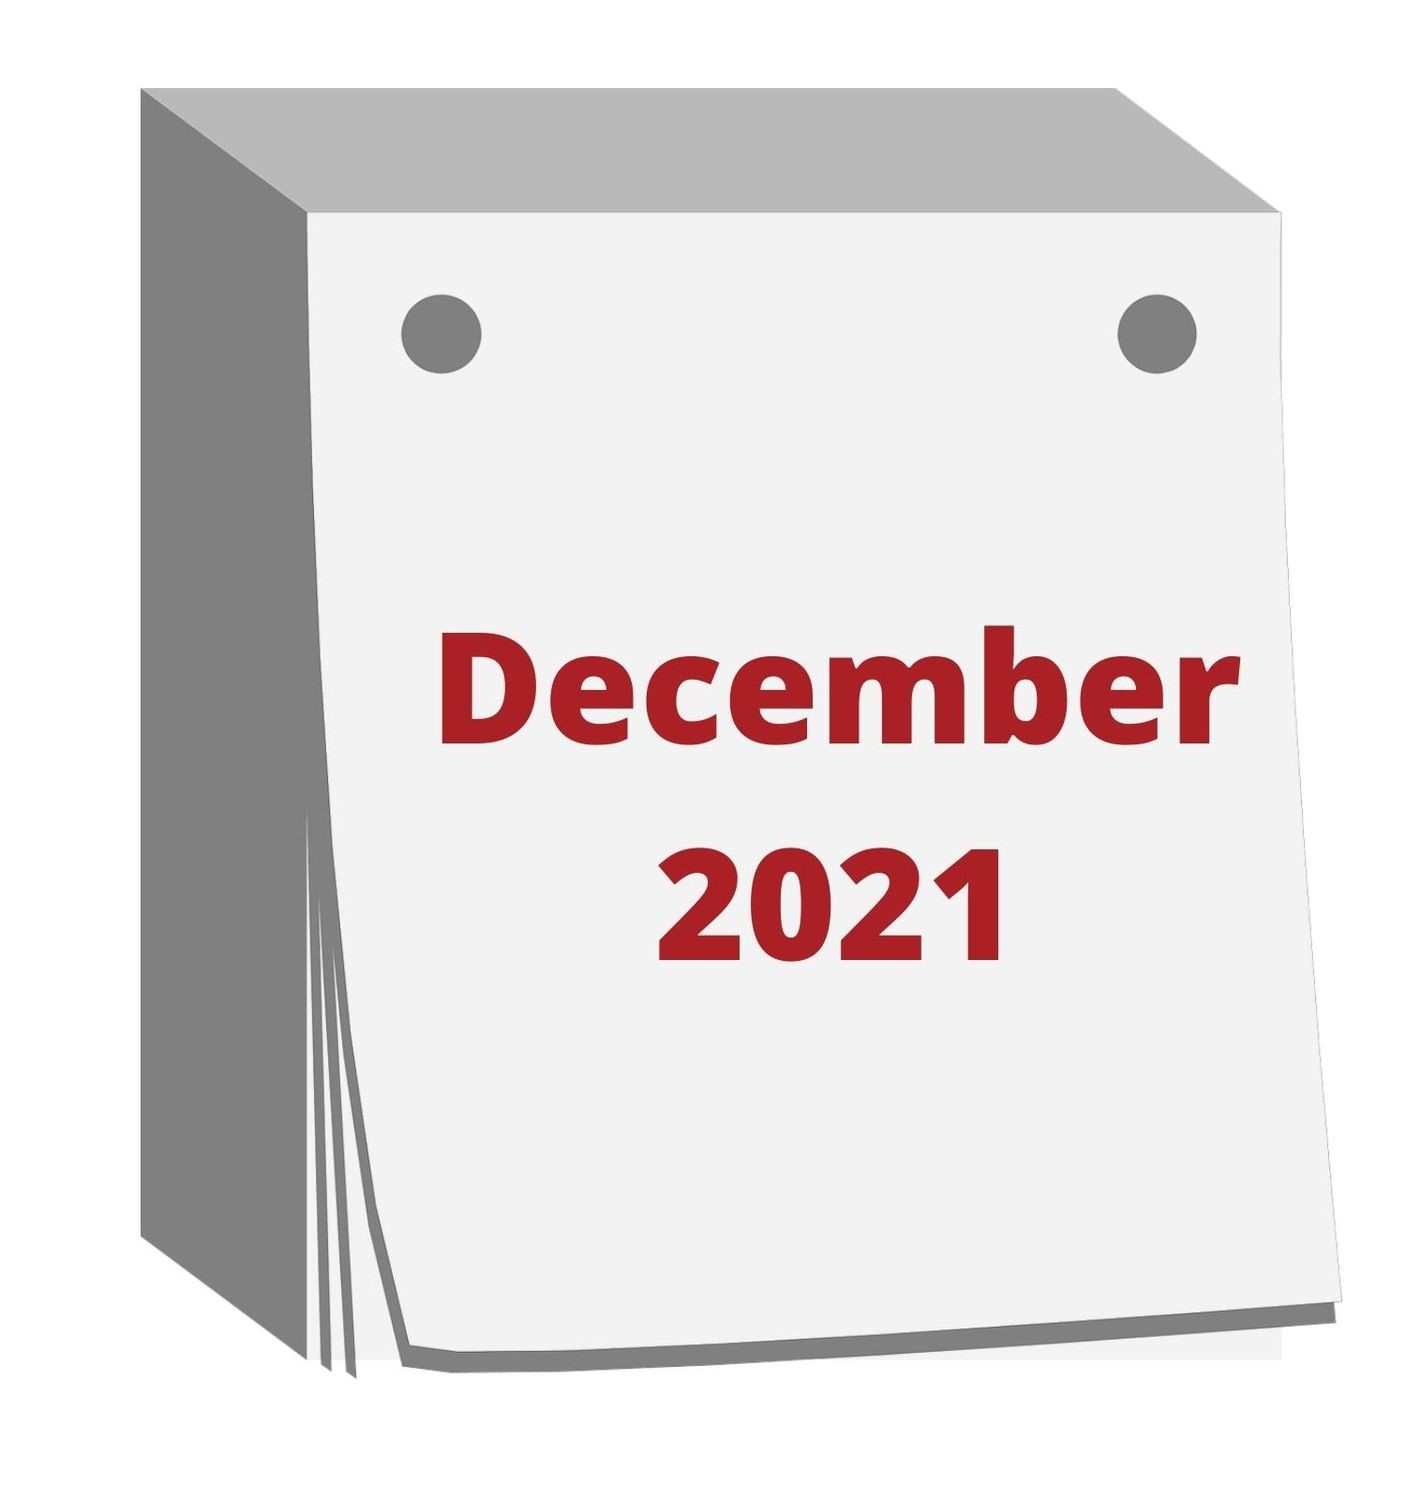 December 2021: Changes to Evaluation System